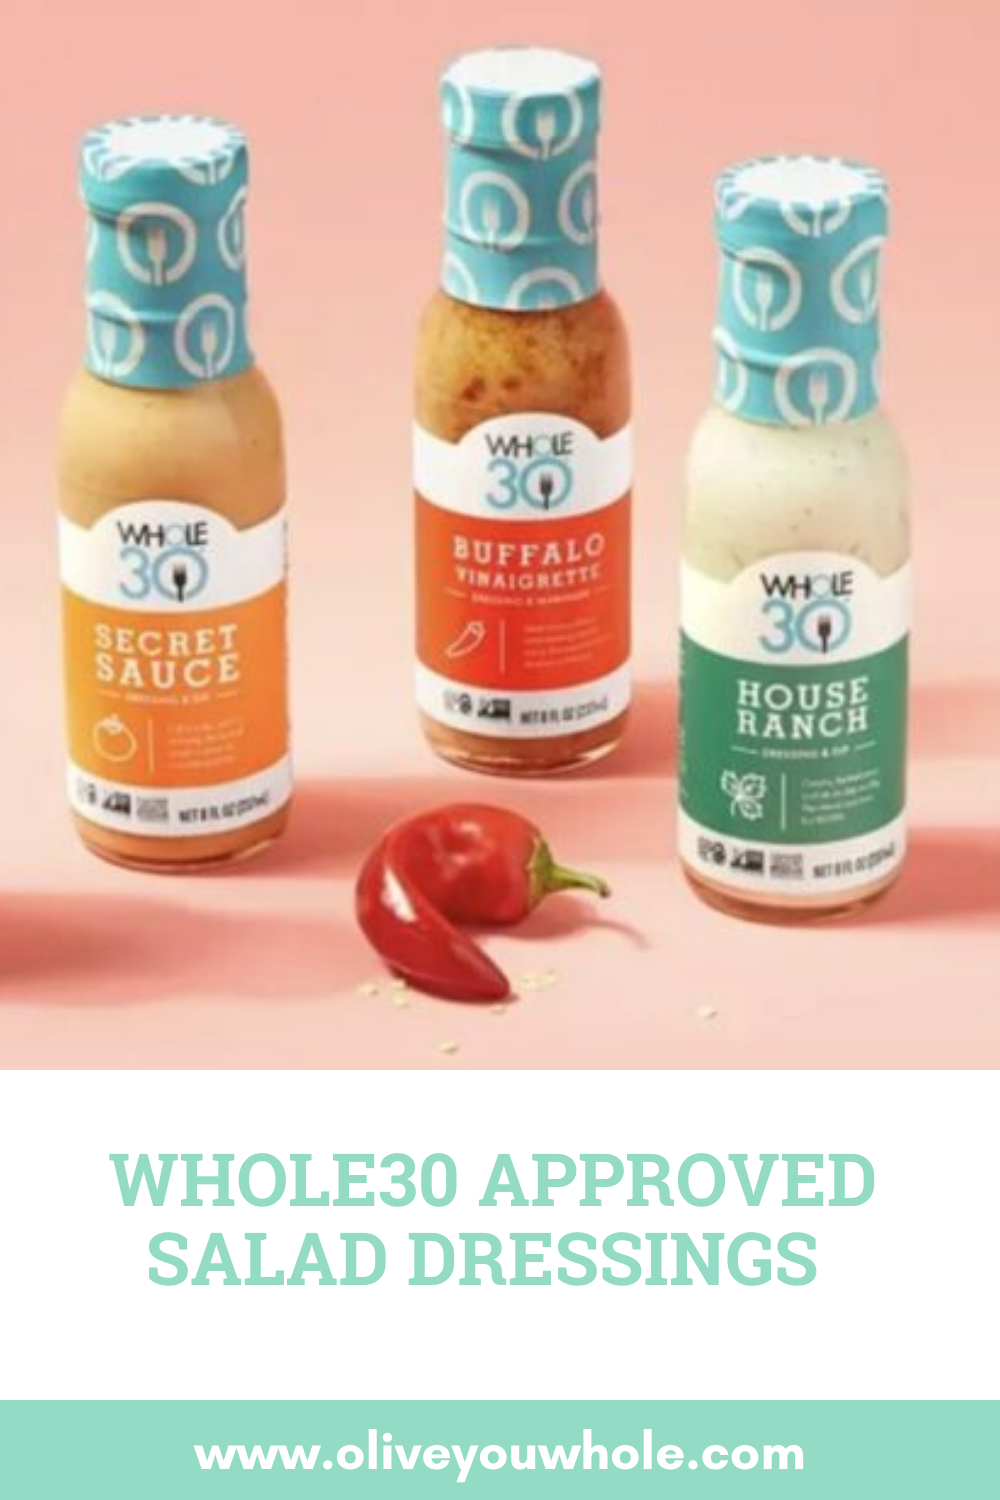 https://www.oliveyouwhole.com/wp-content/uploads/2021/02/Whole30-Approved-Salad-Dressings.png